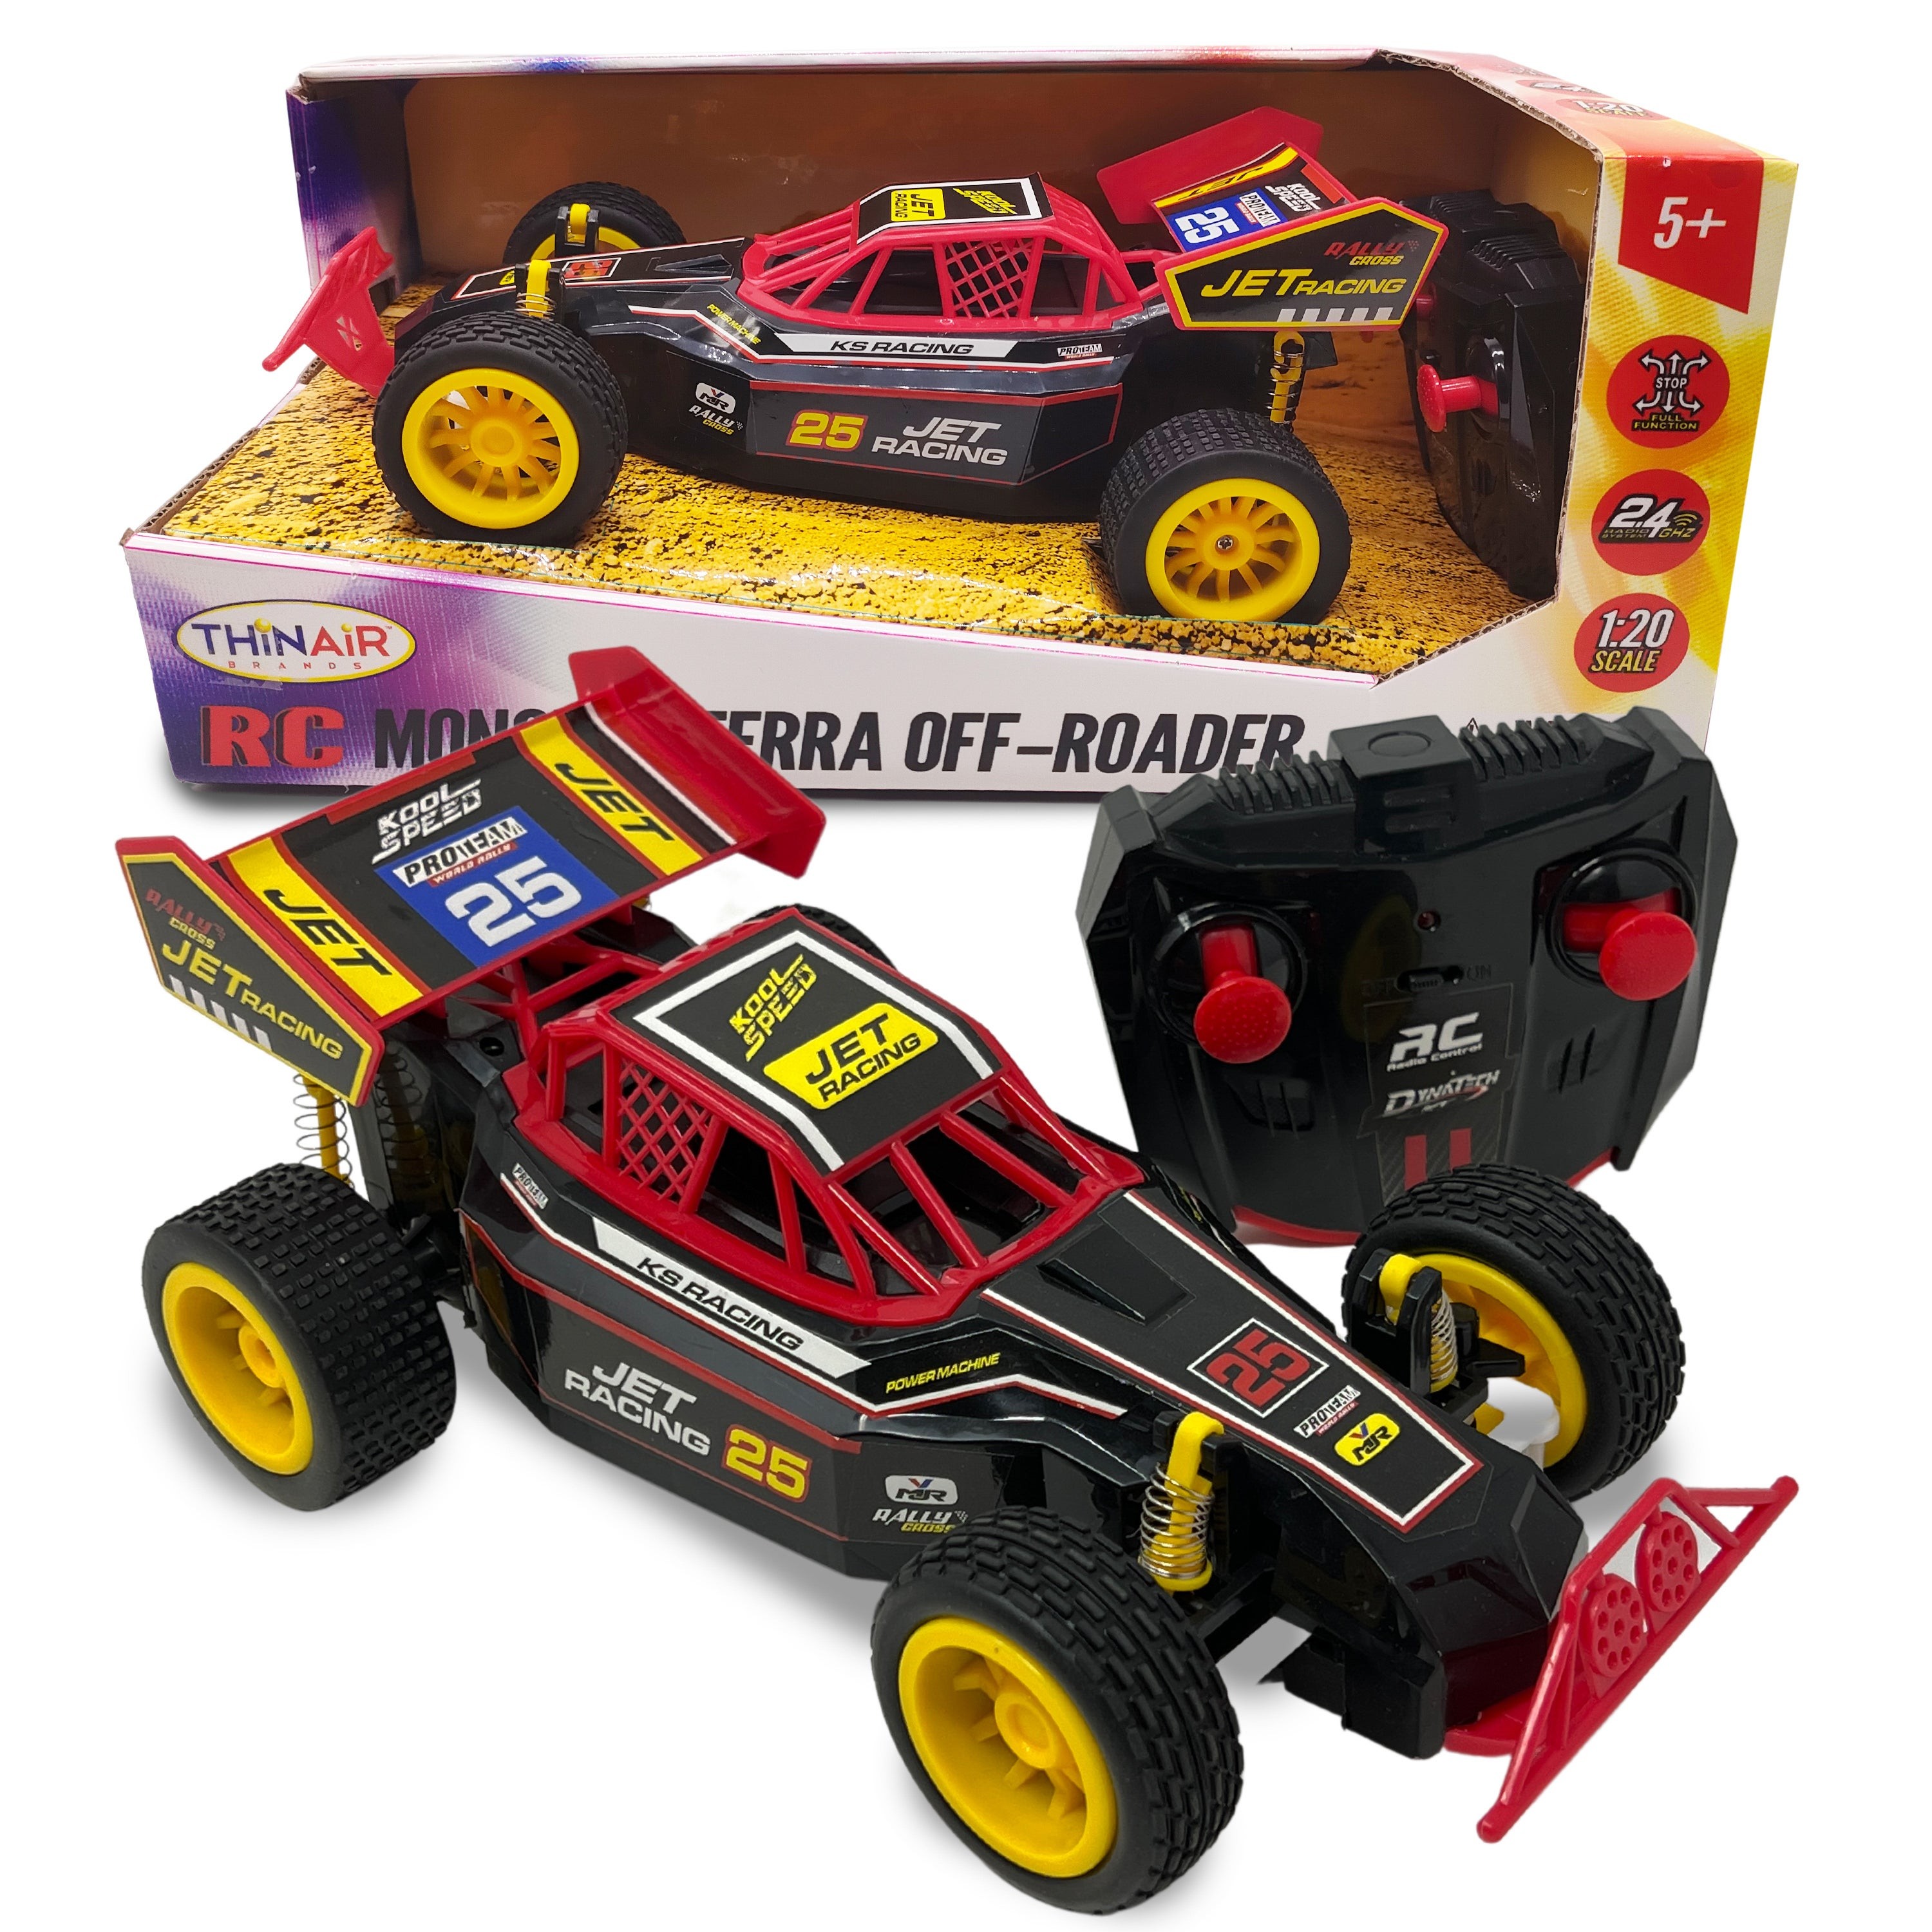 RC Monster Terra Off-Roader 1:20 Scale Ages 5+ Years